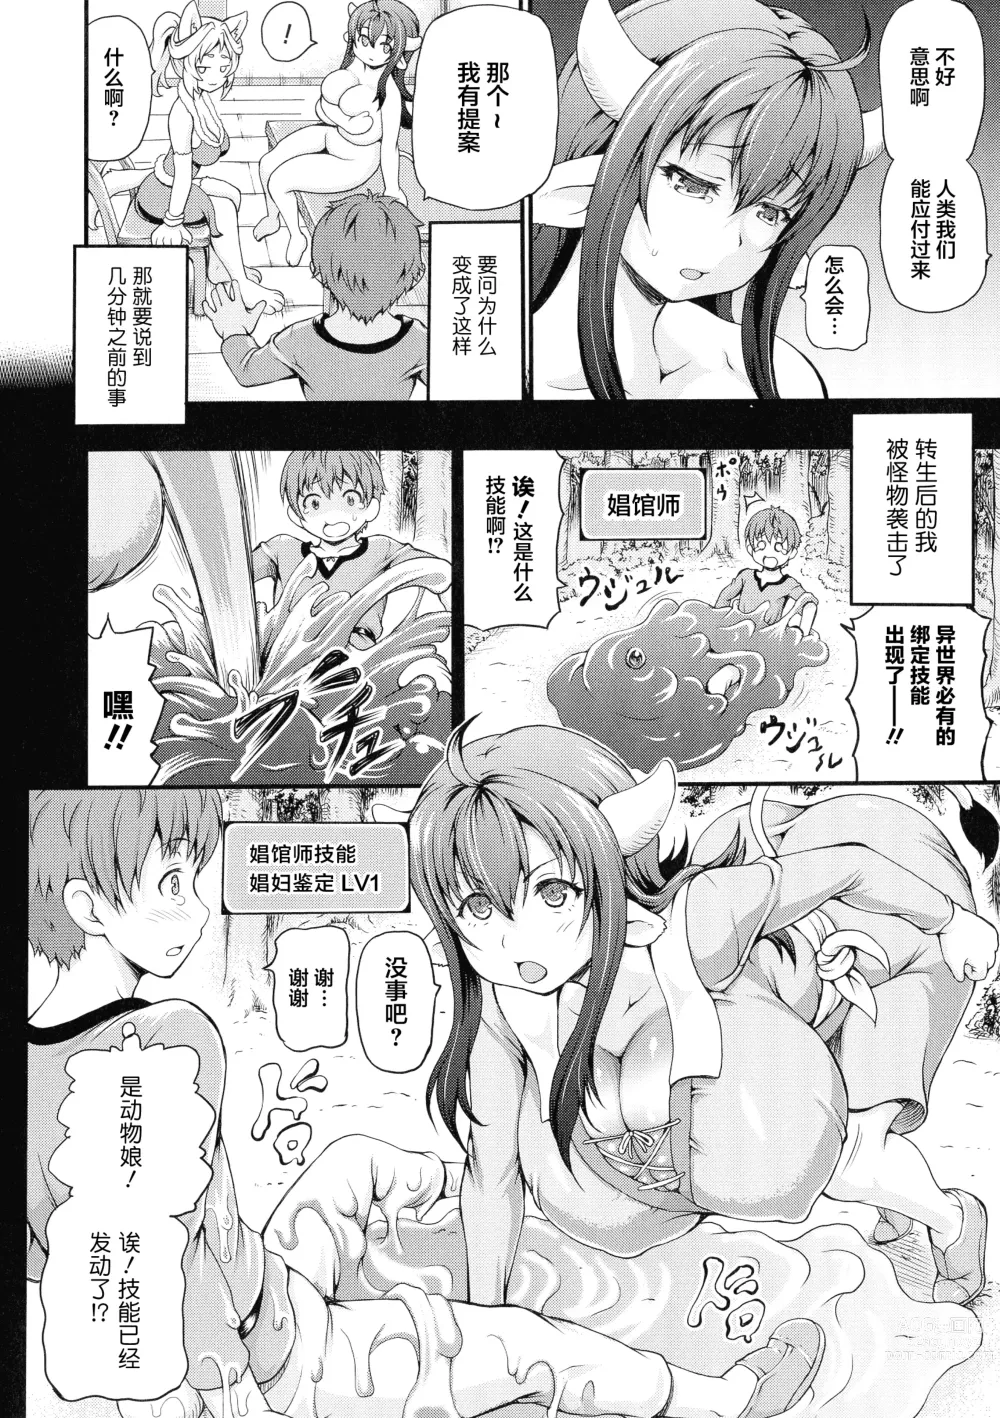 Page 6 of manga Isekai Shoukan - Brothel in Another World